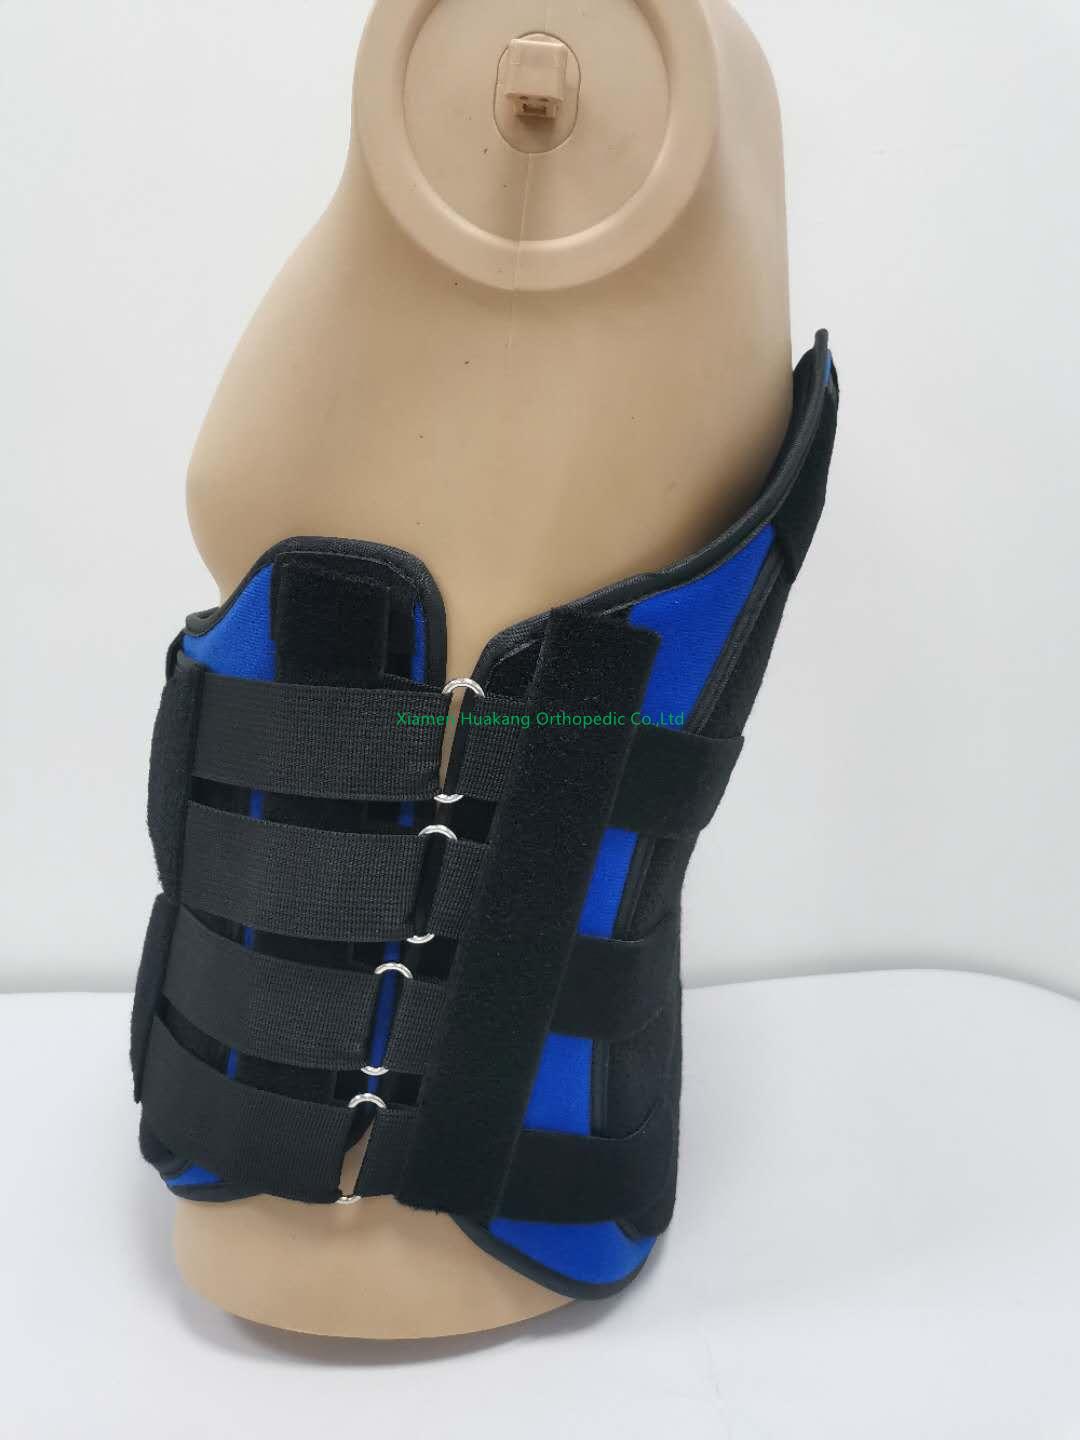 LSO back brace spinal support